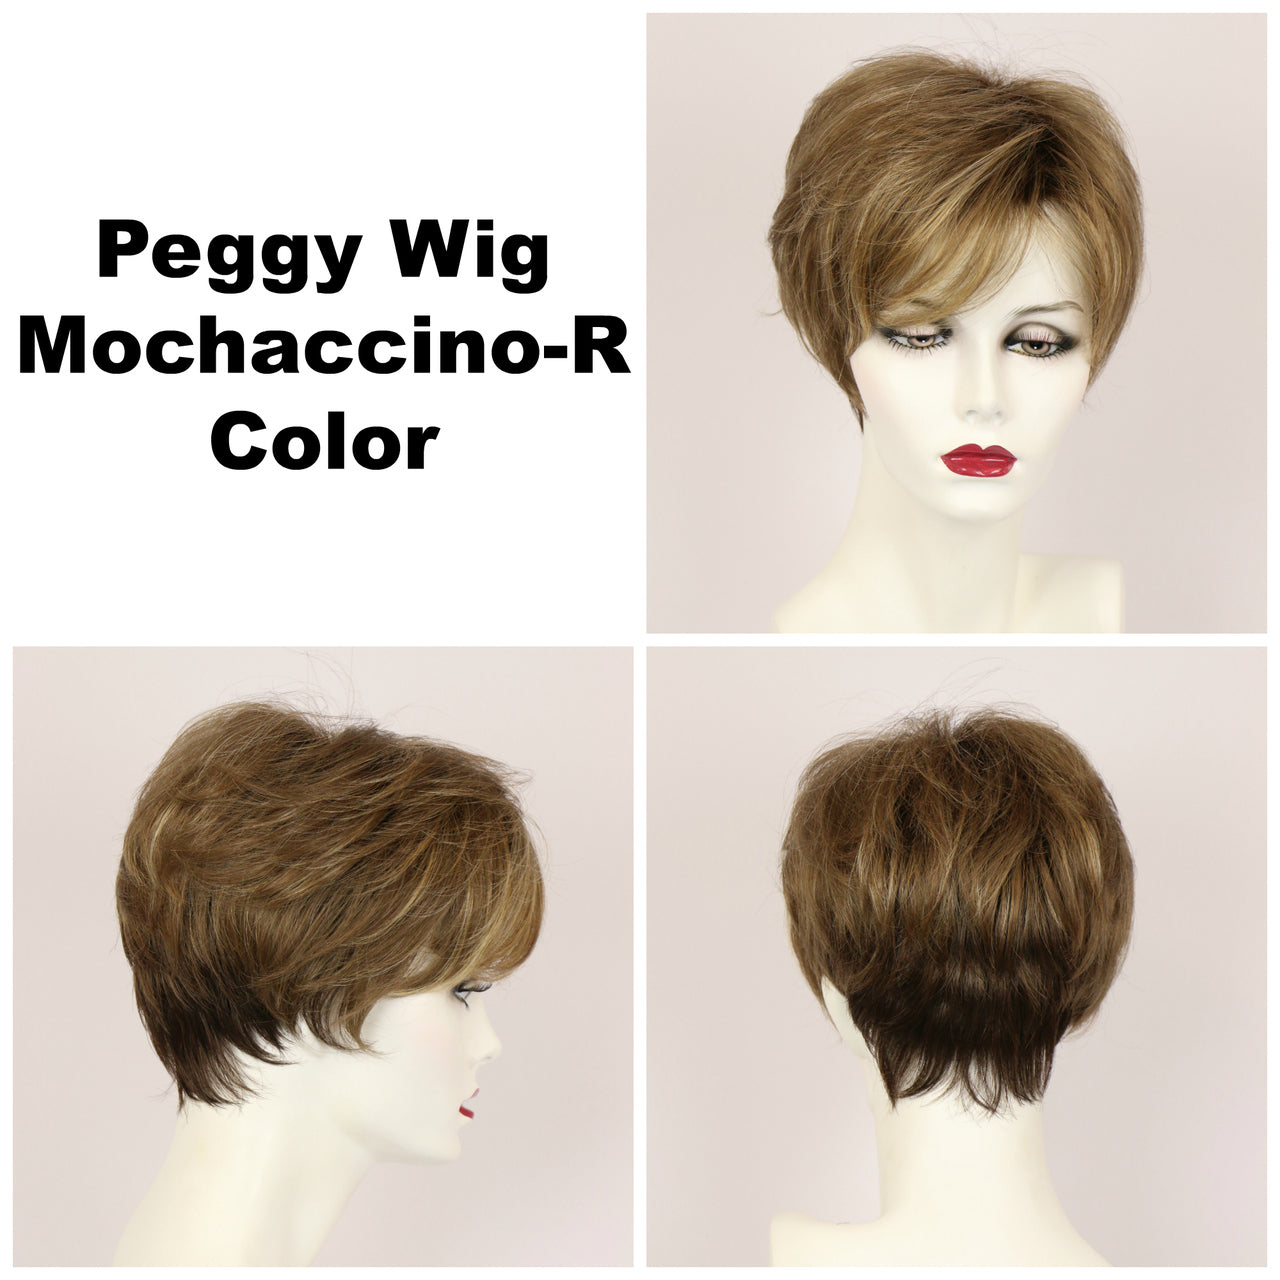 Mochaccino-R / Peggy w/ Roots / Short Wig